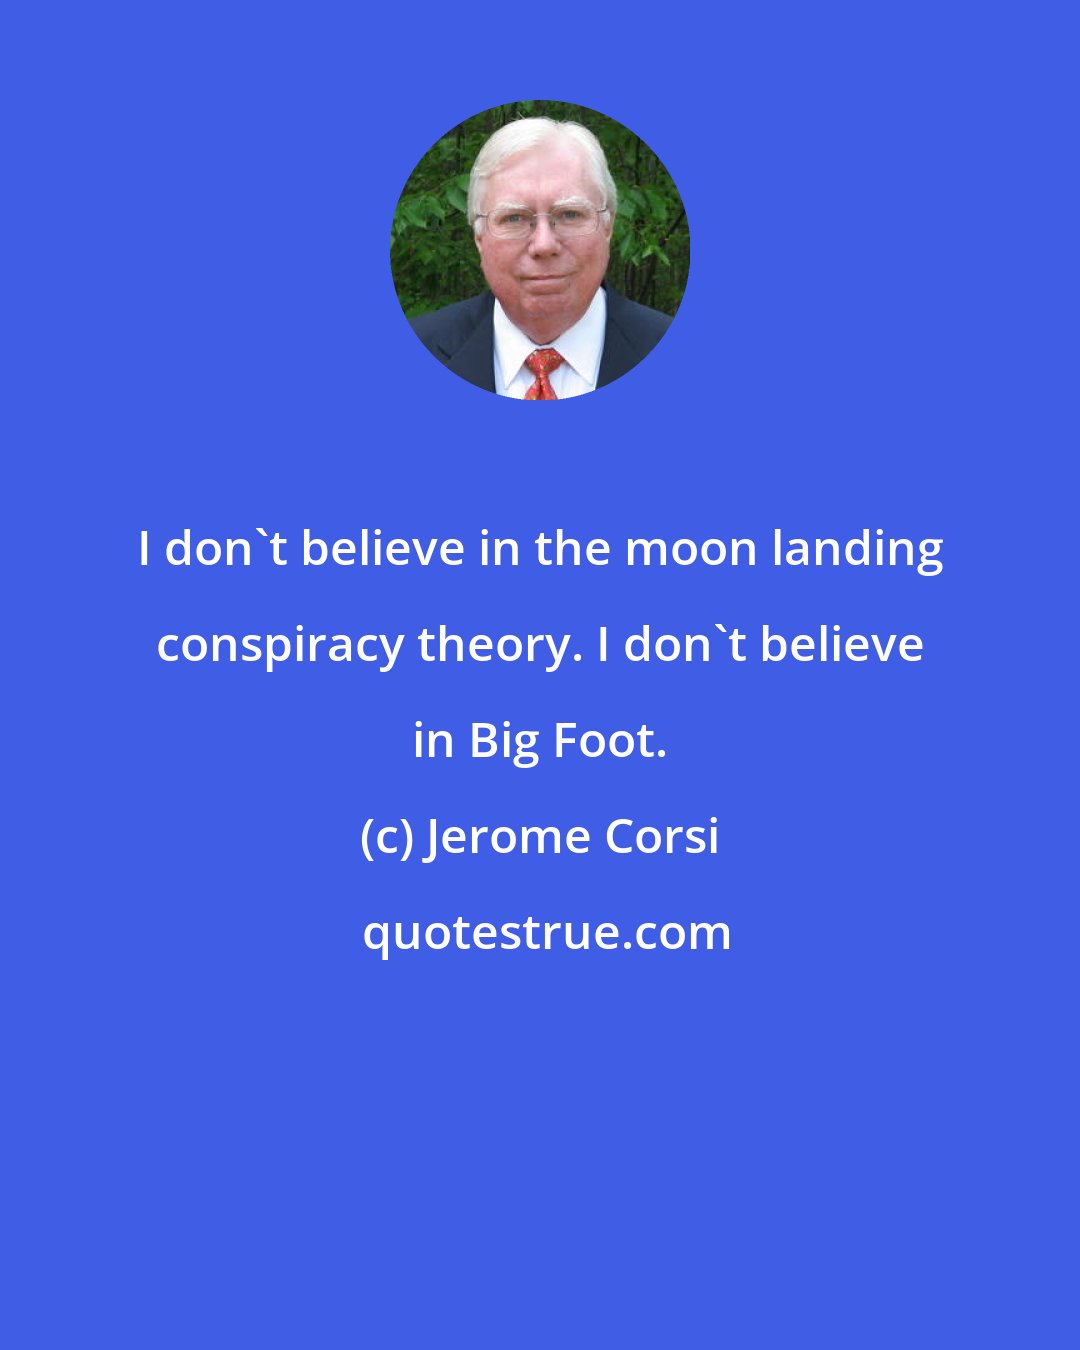 Jerome Corsi: I don't believe in the moon landing conspiracy theory. I don't believe in Big Foot.